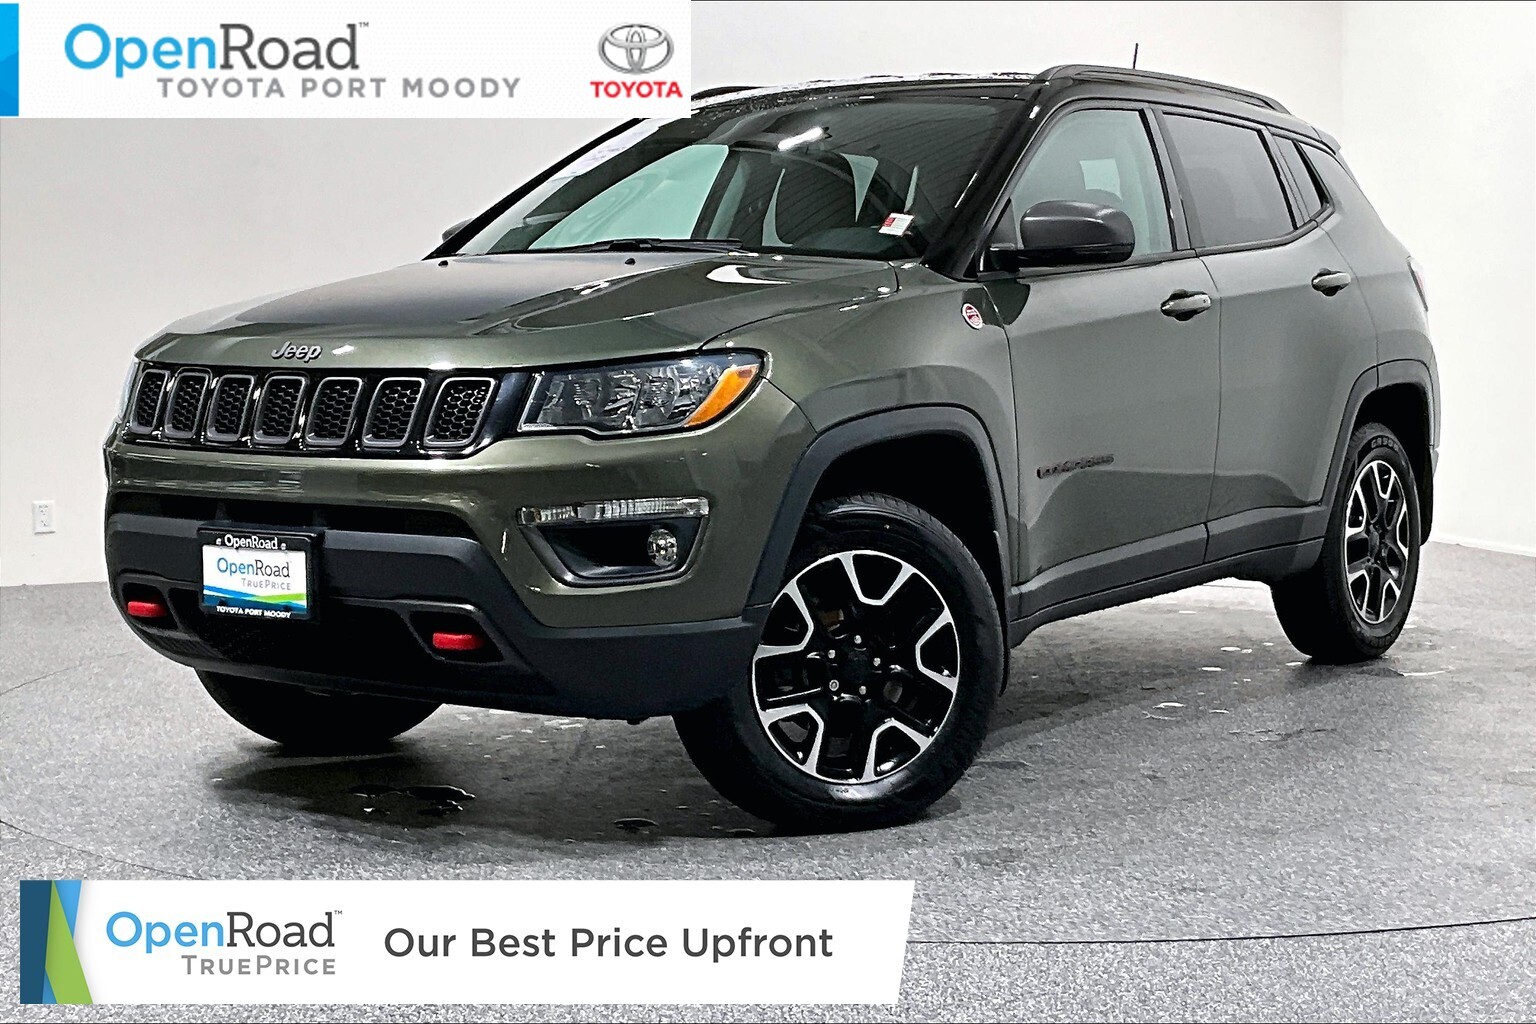 2020 Jeep Compass 4x4 Trailhawk |OpenRoad True Price |Local |One Own